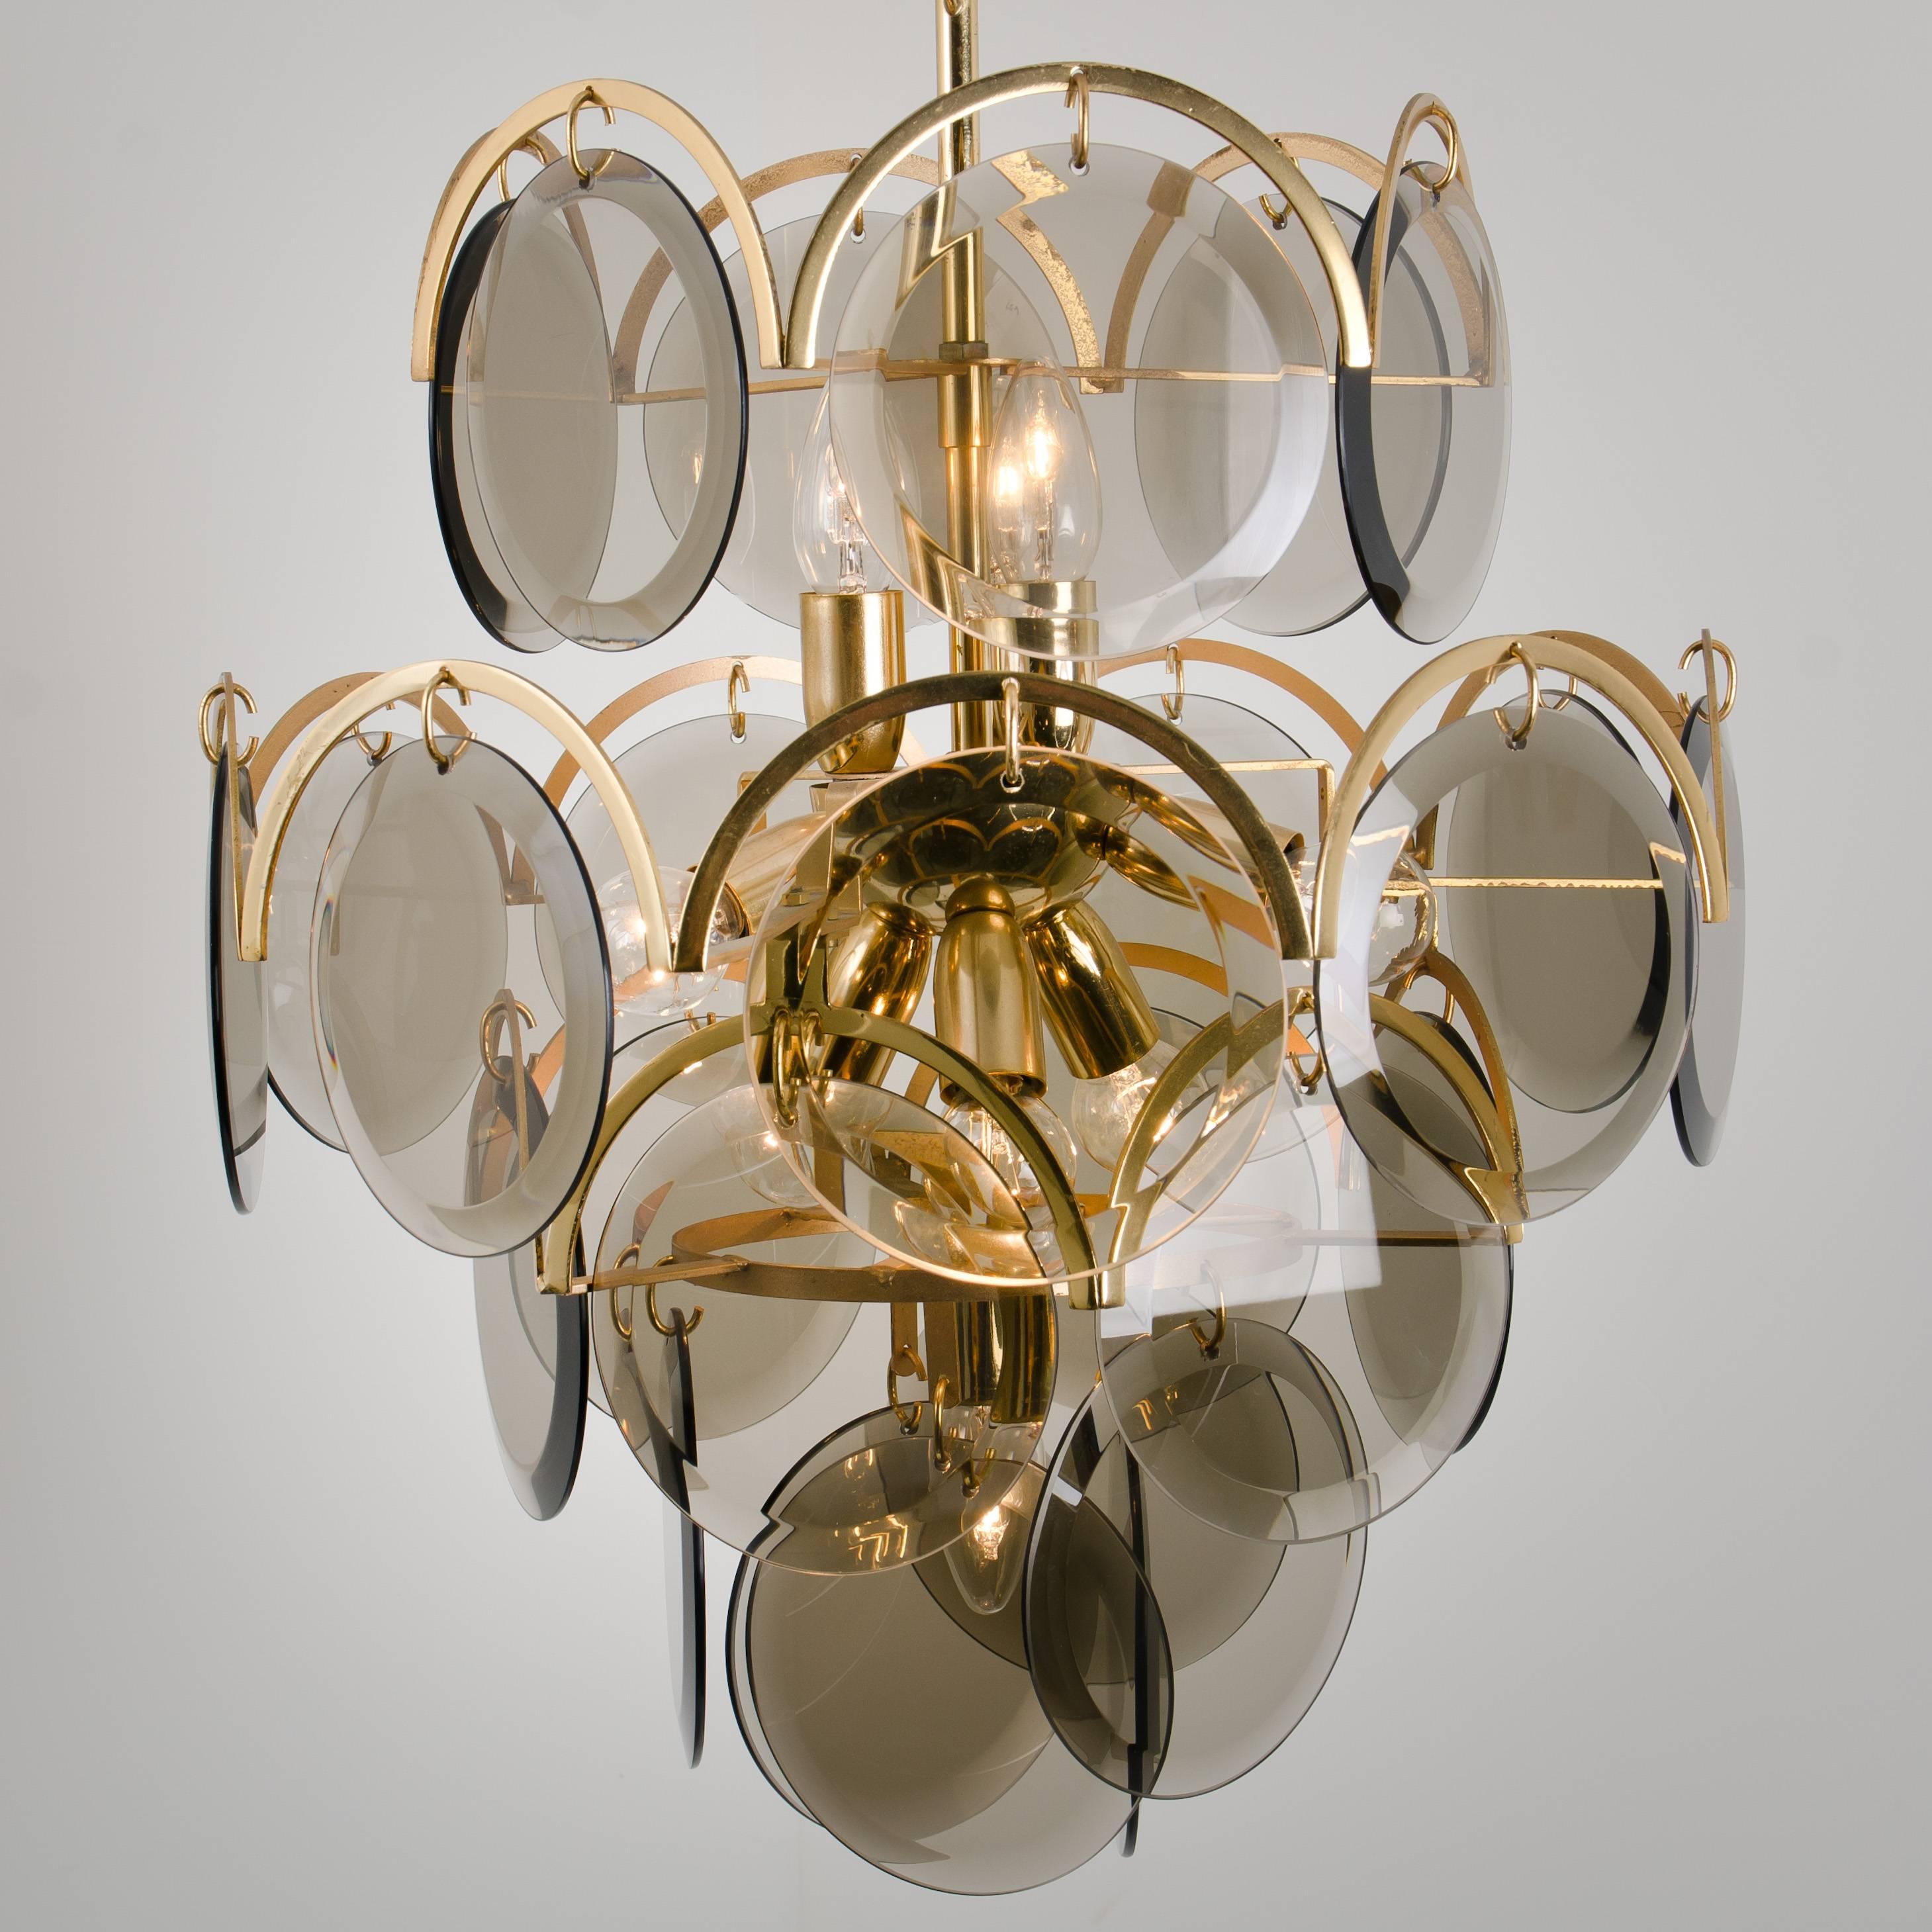 A set of three gorgeous hanging light fixtures, attributed to Vistosi with graduated tiers of smoked round facet chapped glass discs framed by half moon shaped brass. The chandeliers are complete, no hook or glass disk is missing, with its original